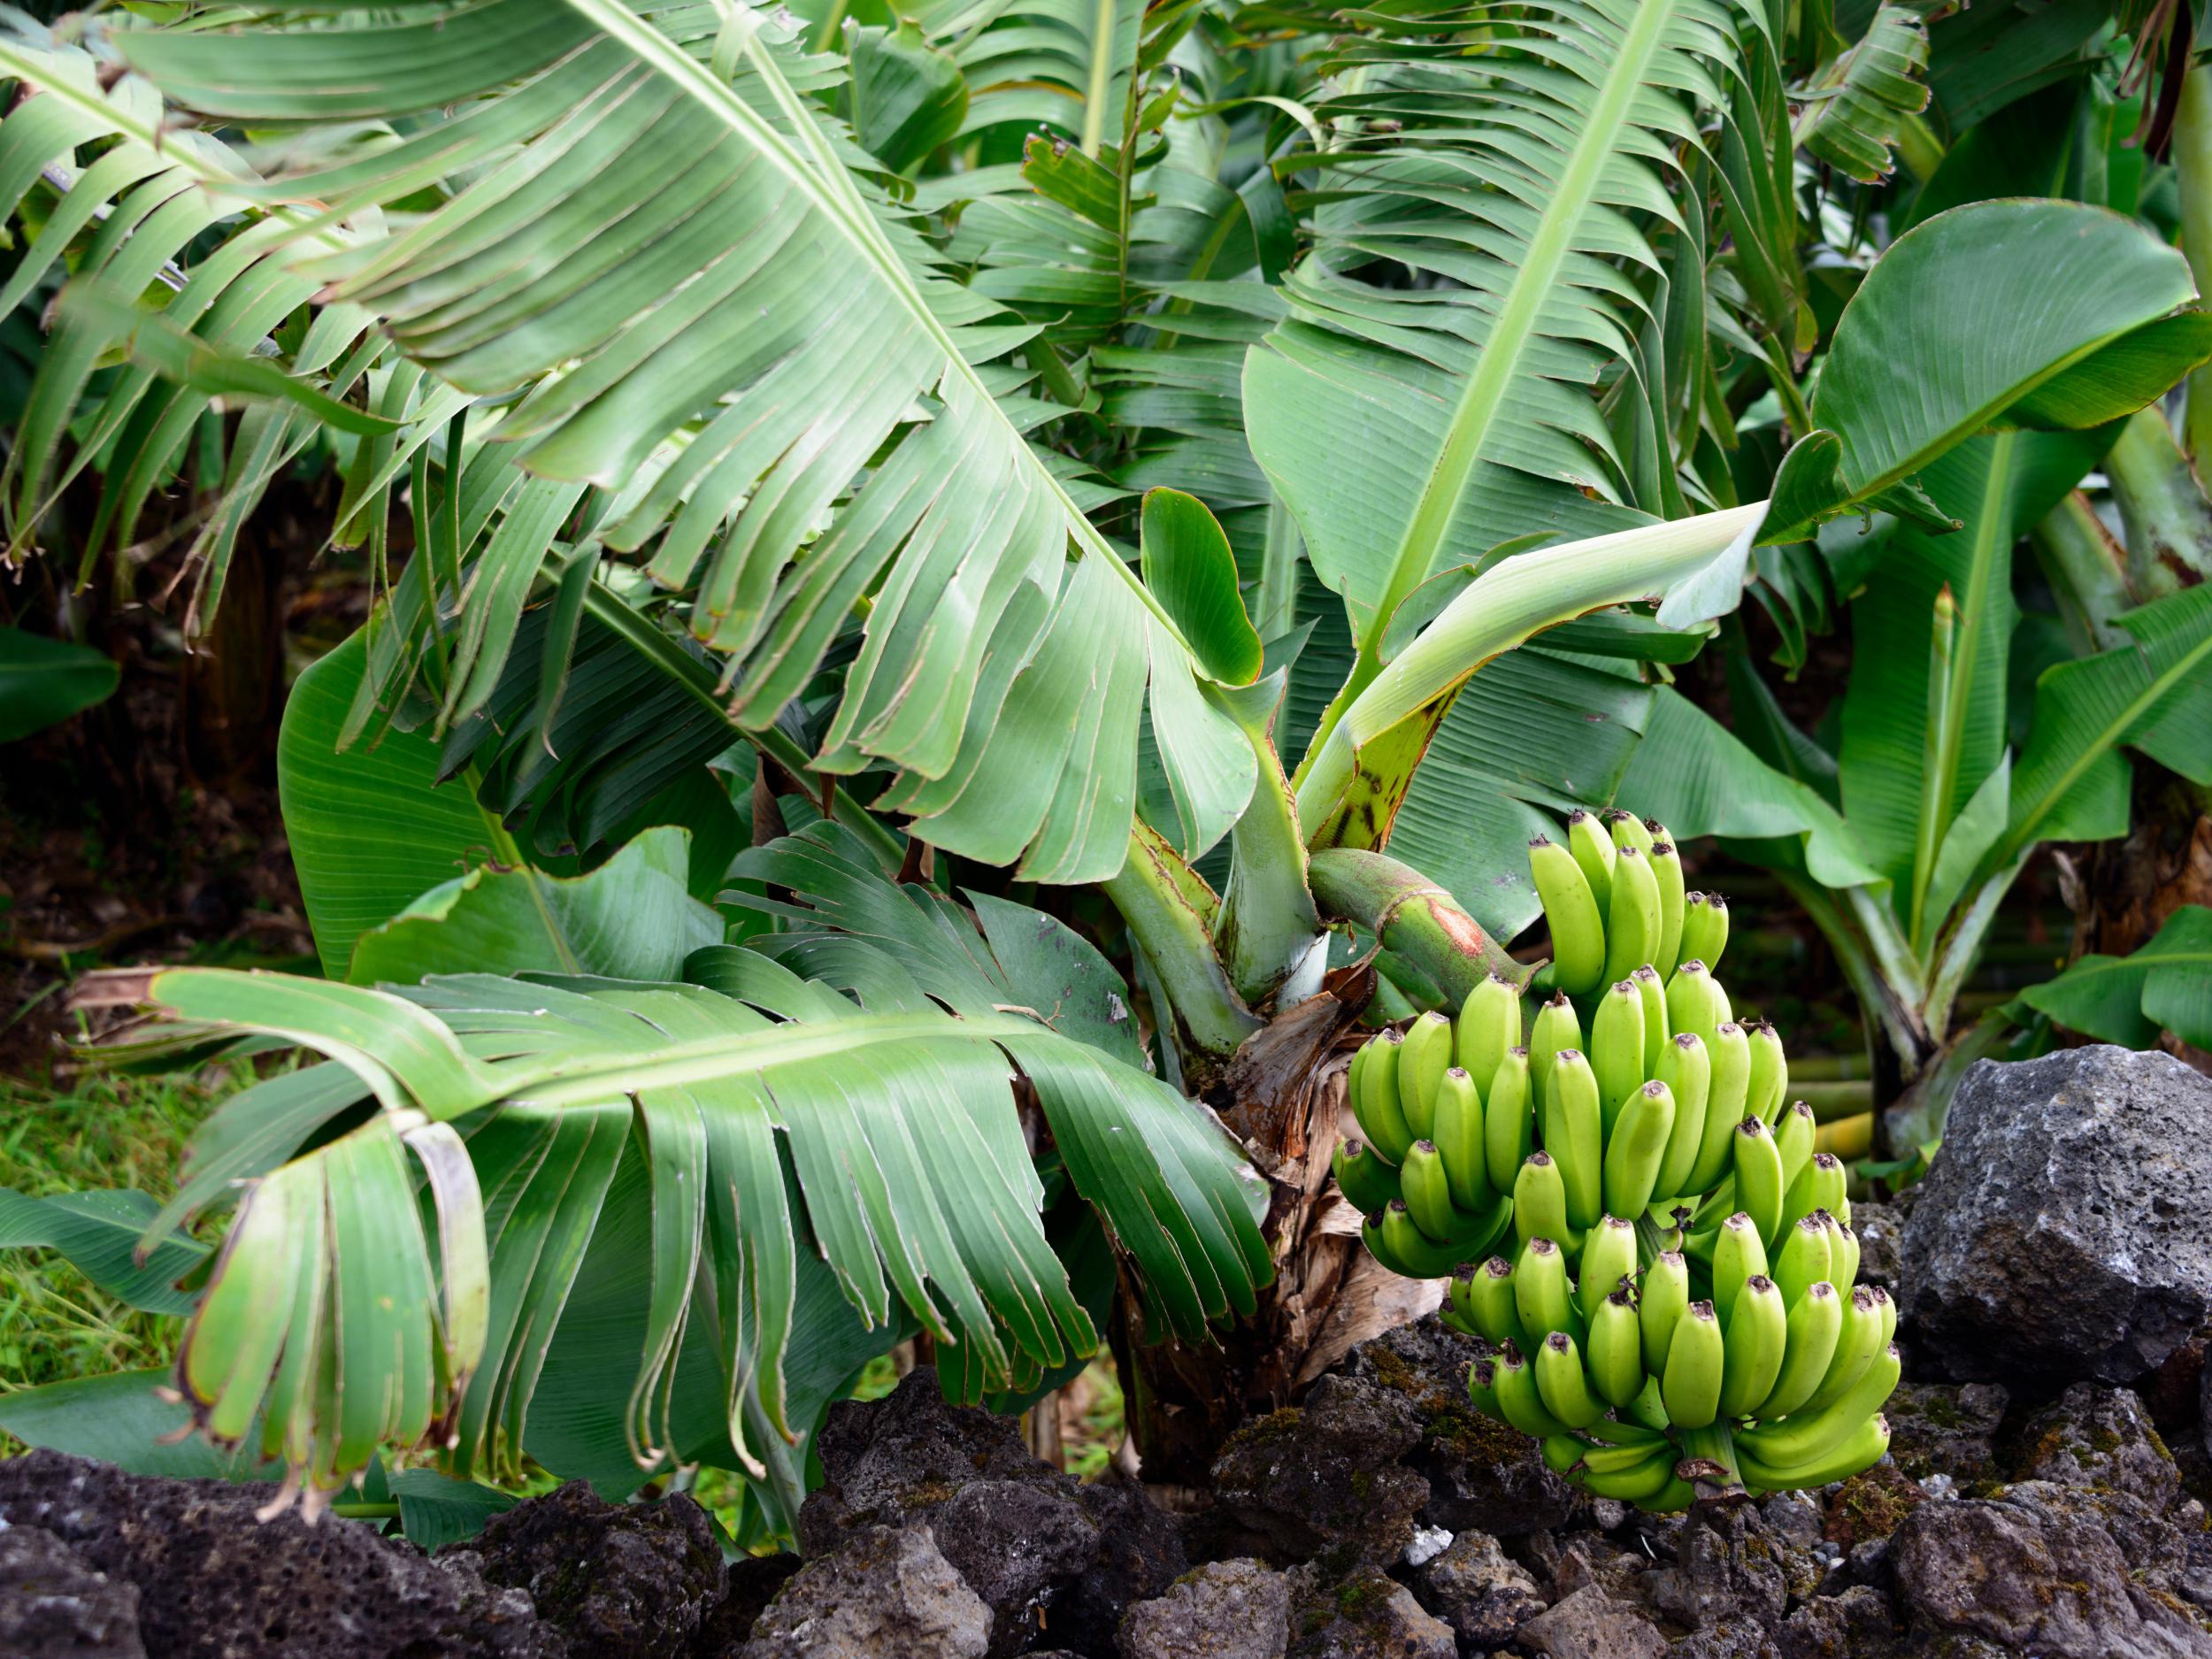 Humans share 50 per cent of our genetic material with a banana plant